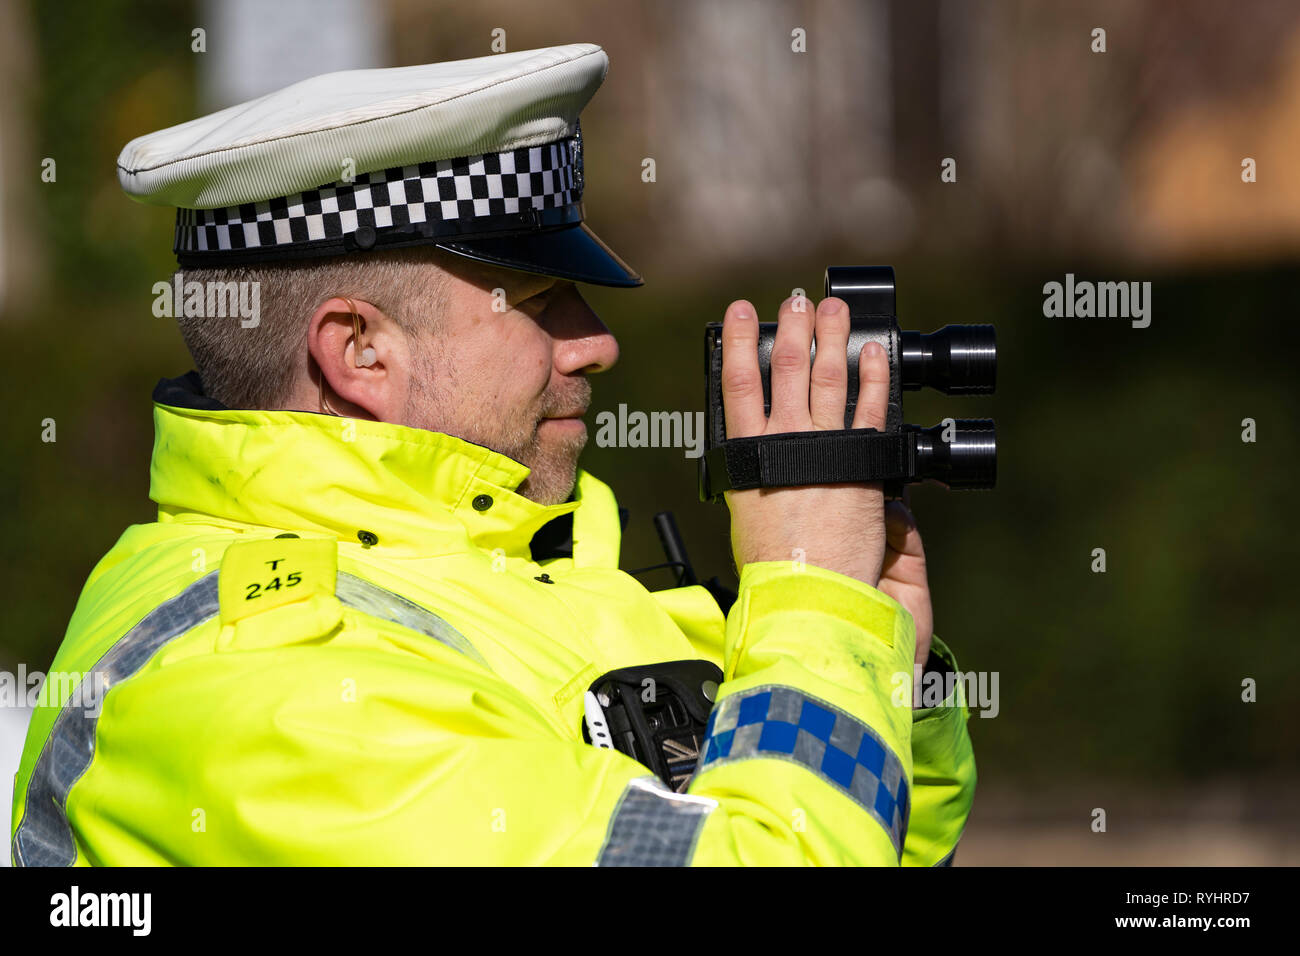 Edinburgh, Scotland, UK. 14 March, 2019. Police checking car speeds in Edinburgh at the first in a series of pilot 20mph ‘Roadside Education’ events, held in partnership with Police Scotland, aiming to raise awareness of the consequences of breaking 20mph speed limits. Speeding drivers will be stopped by Police Officers and offered a short driver education session in a Police Command Unit. Credit: Iain Masterton/Alamy Live News Stock Photo